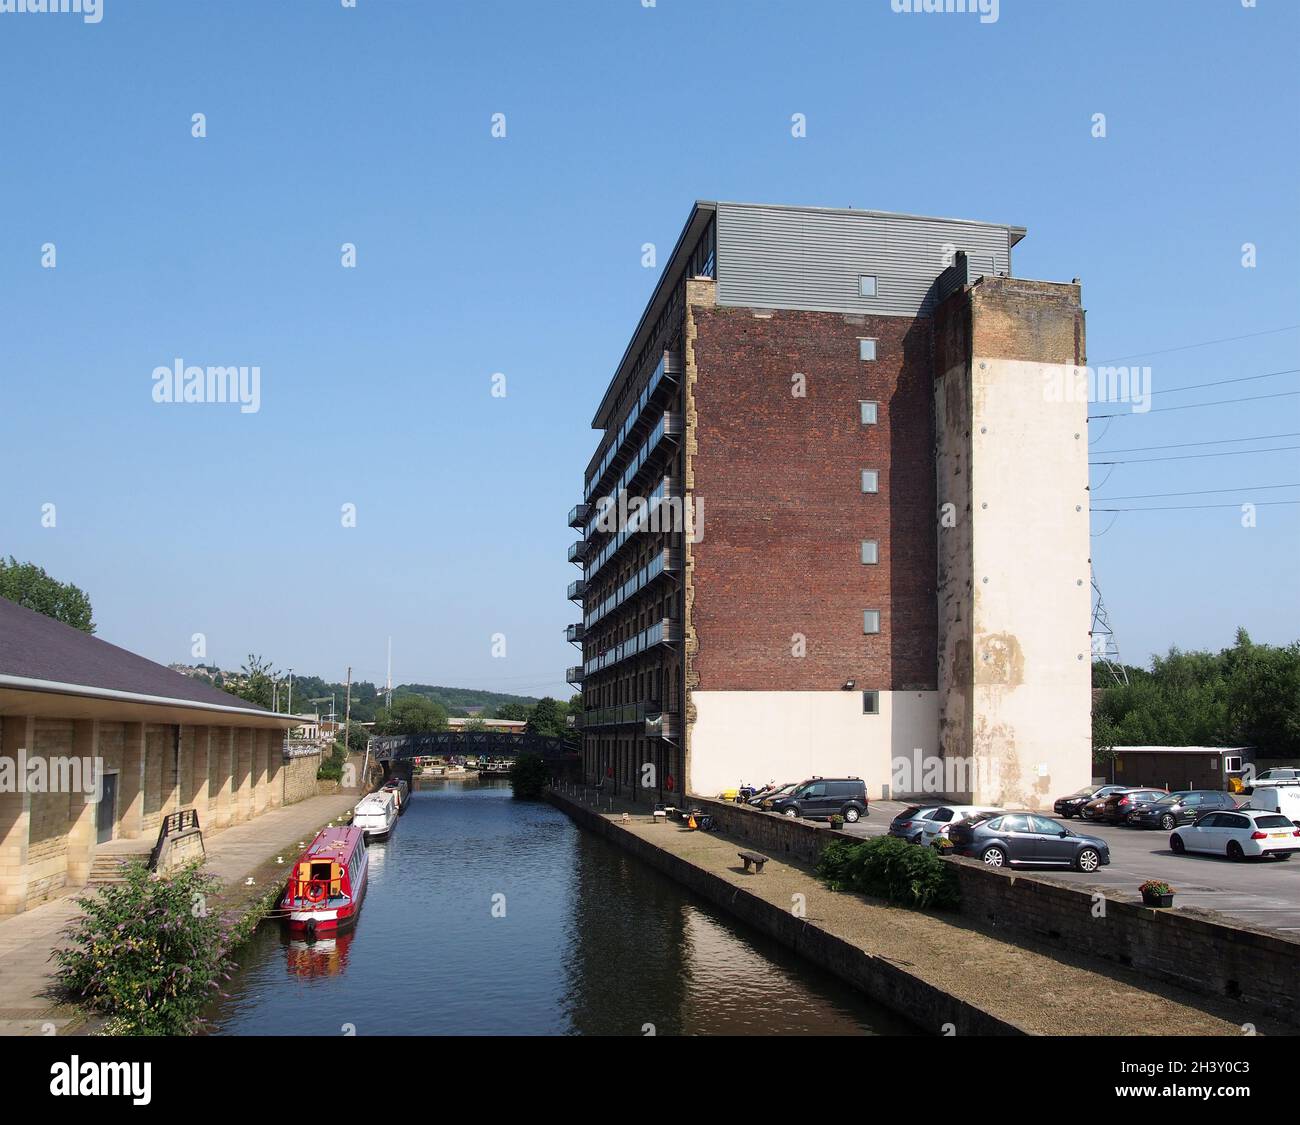 The canal and entrance to brighouse basin in west yorkshire with traditional narrow boats and apartment buildings Stock Photo